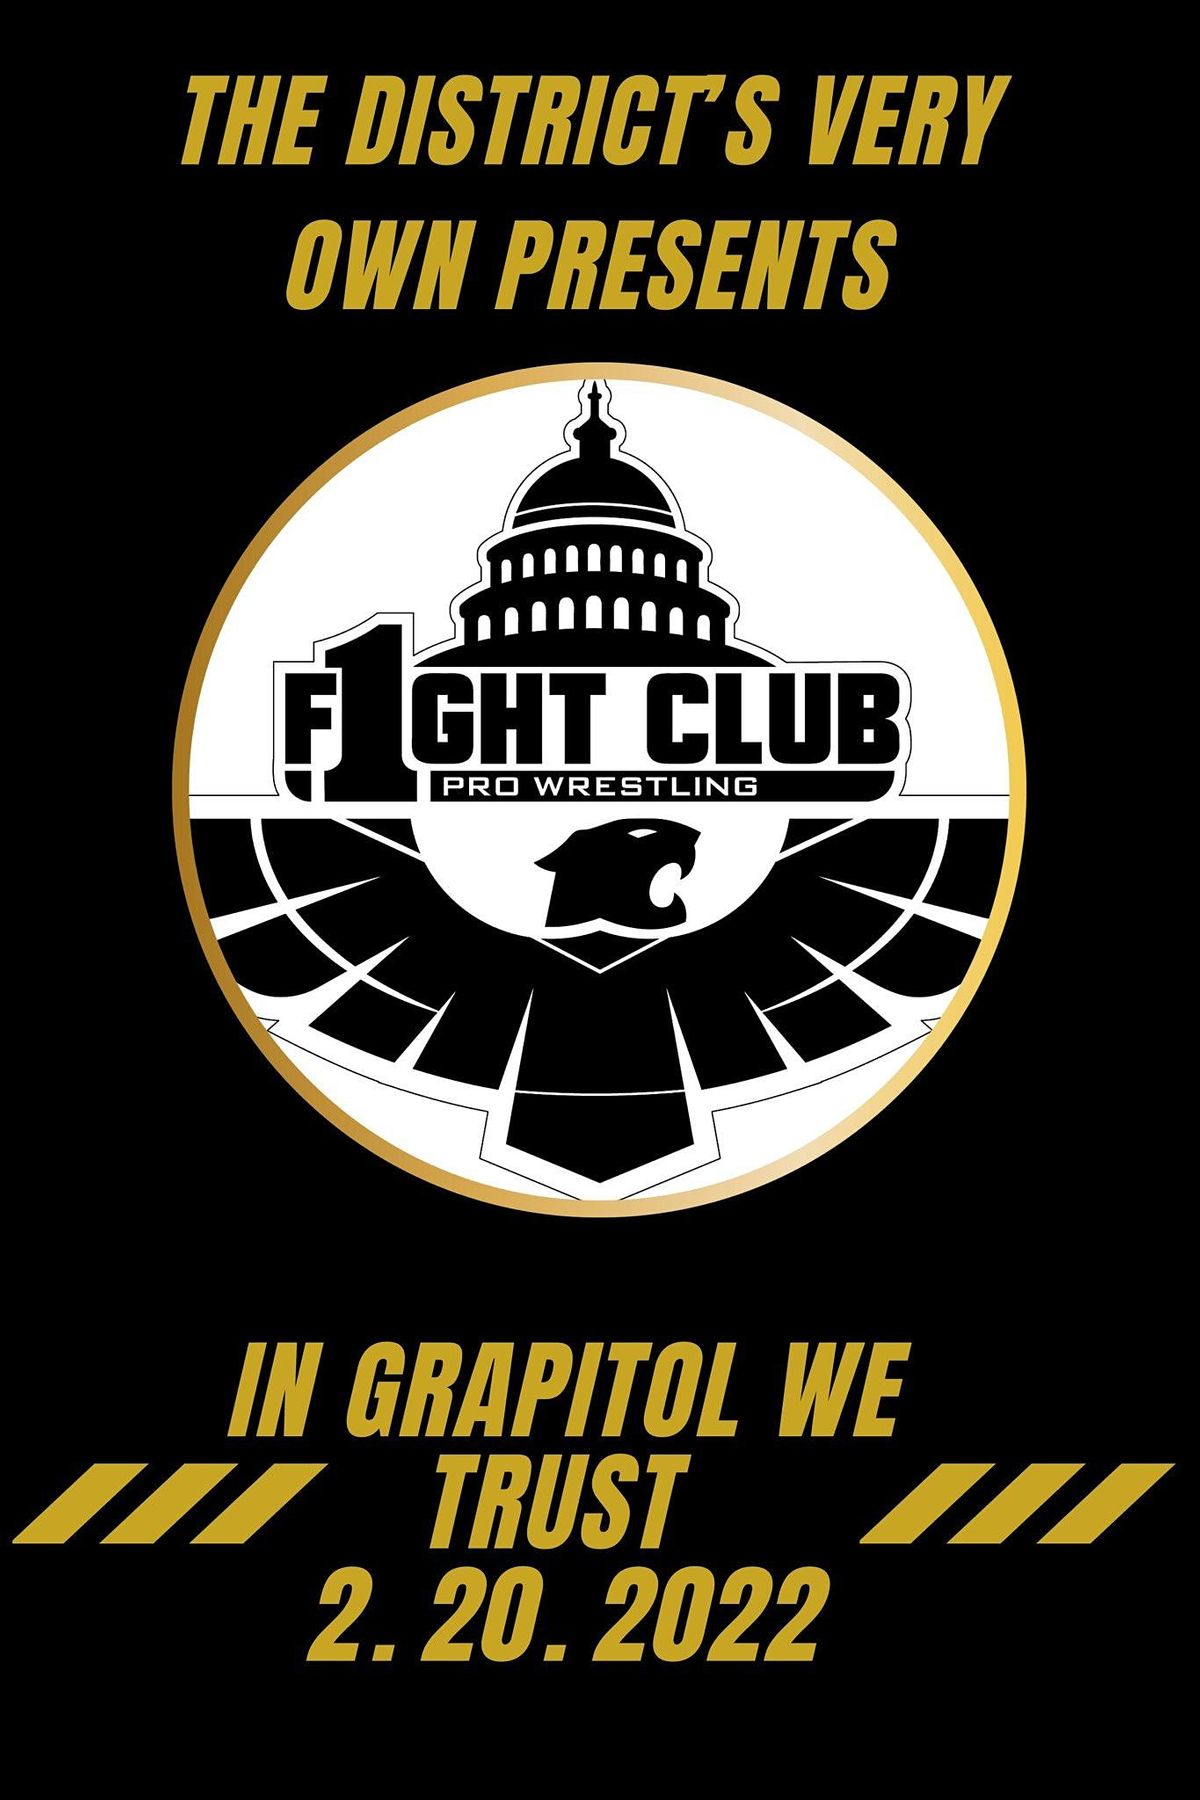 F1ght Club: In Grapitol We Trust